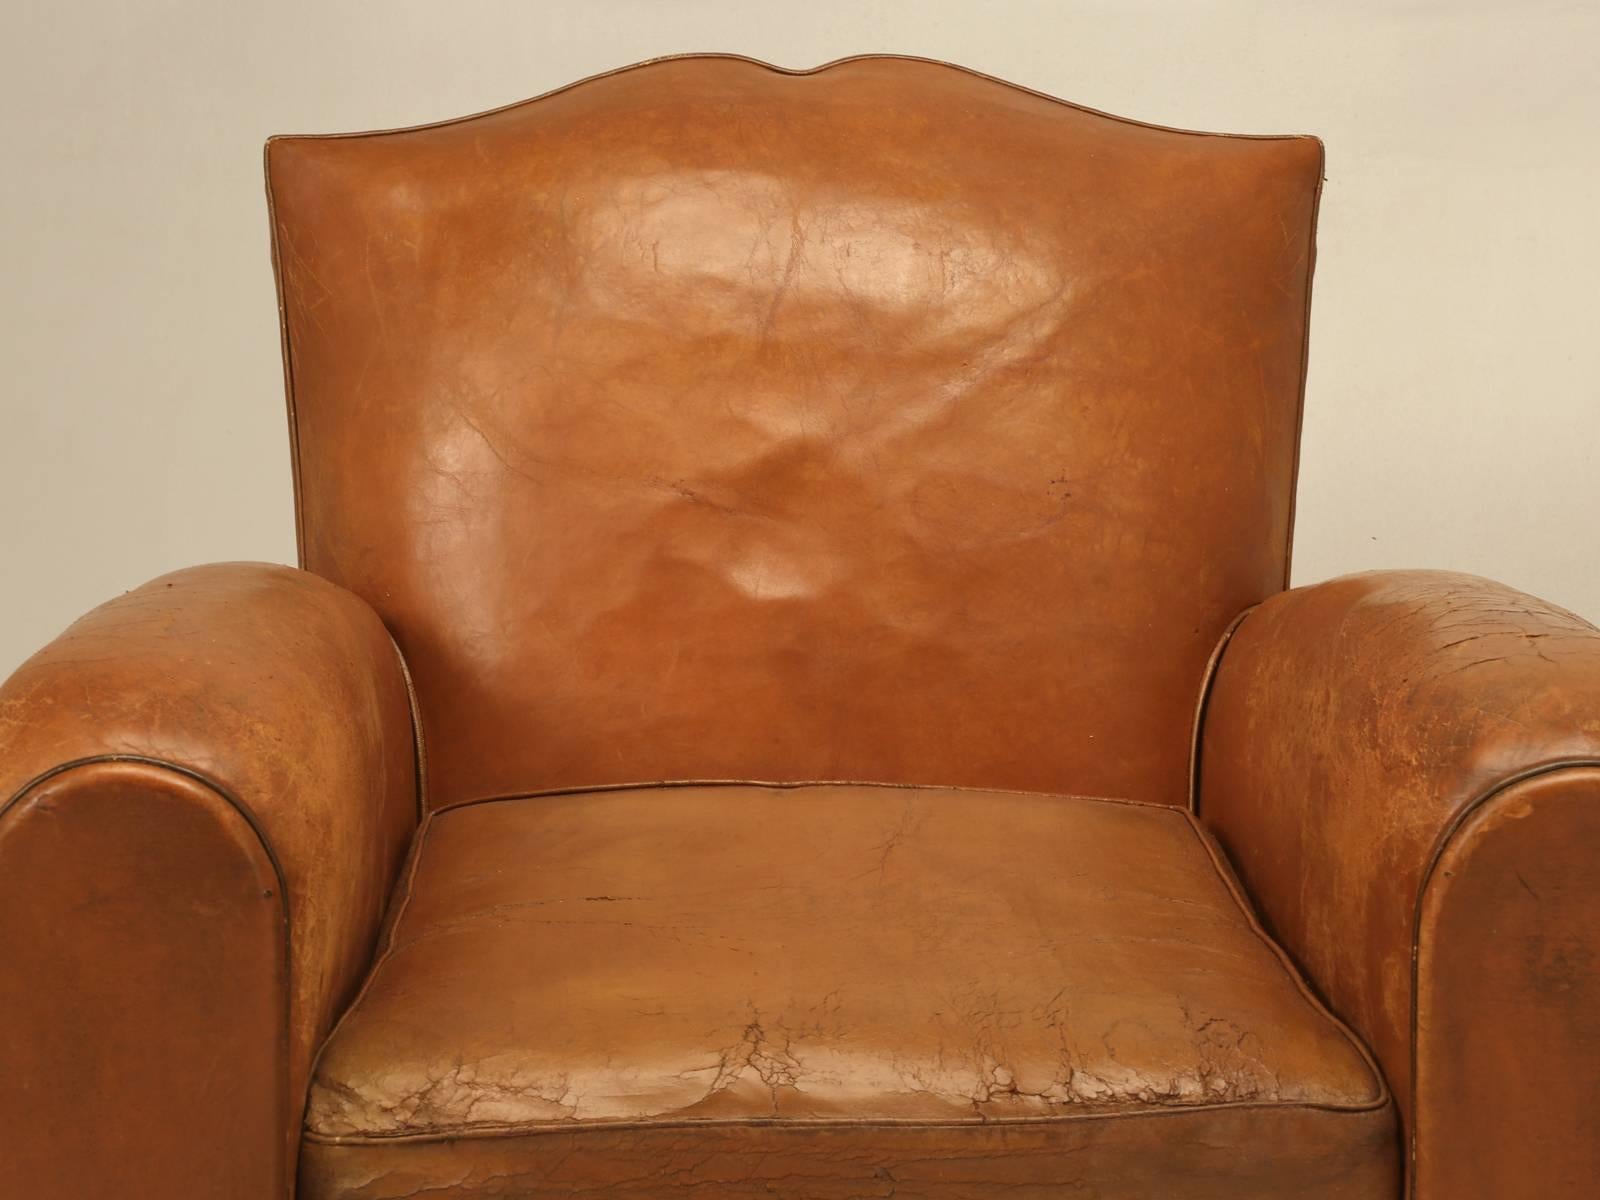 Although not exactly a pair of French leather club chairs, they have been together in the same house since new, from the city of Deauville, France a picturesque seaside town in Normandy. The leather is all original and since they were always a pair,